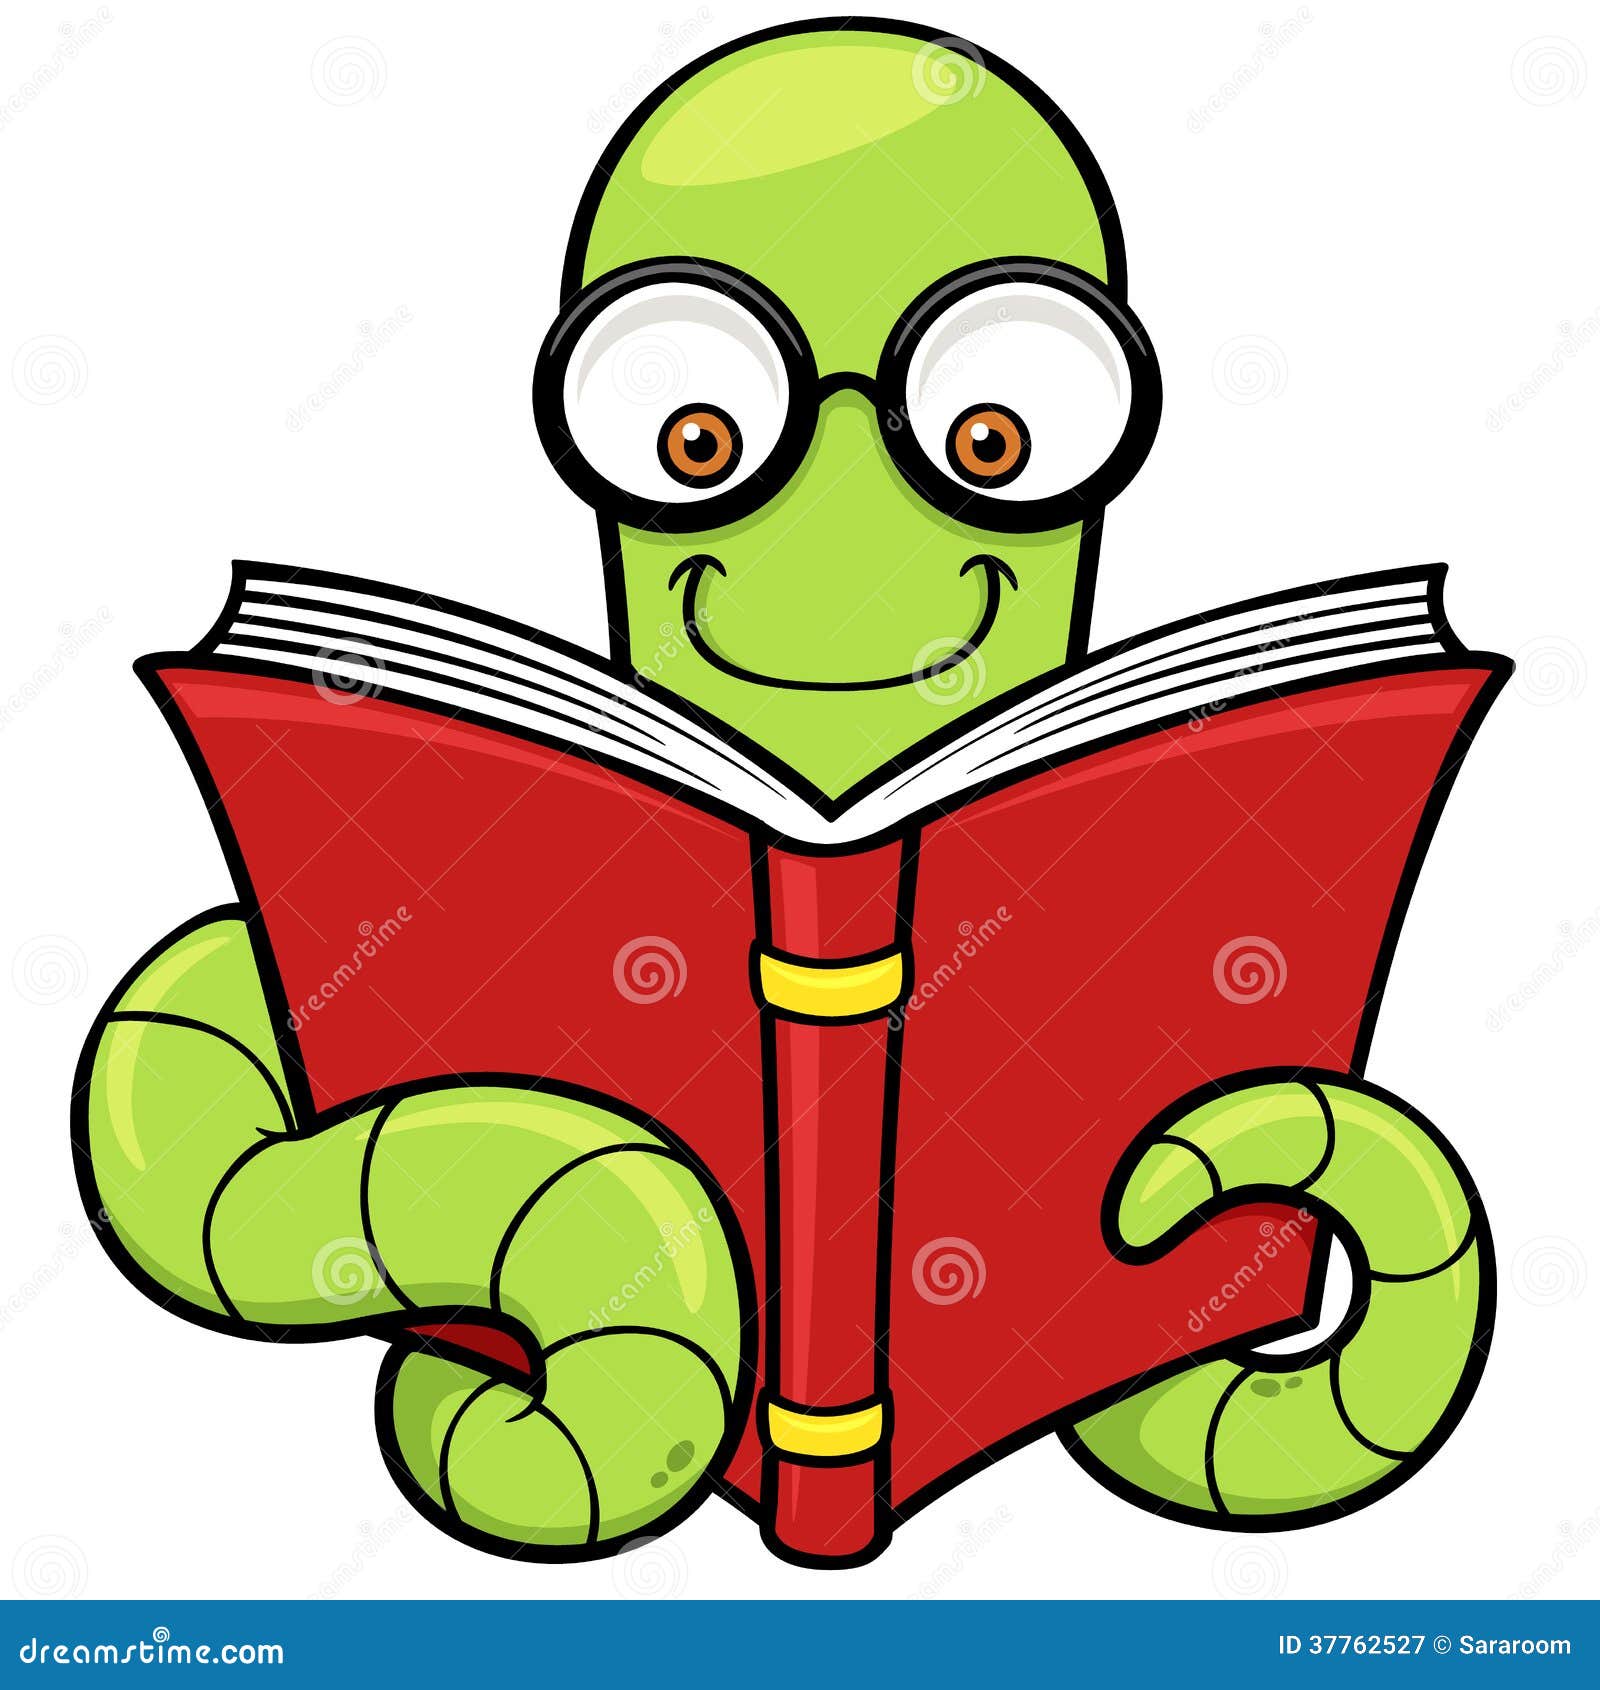 free animated bookworm clipart - photo #33